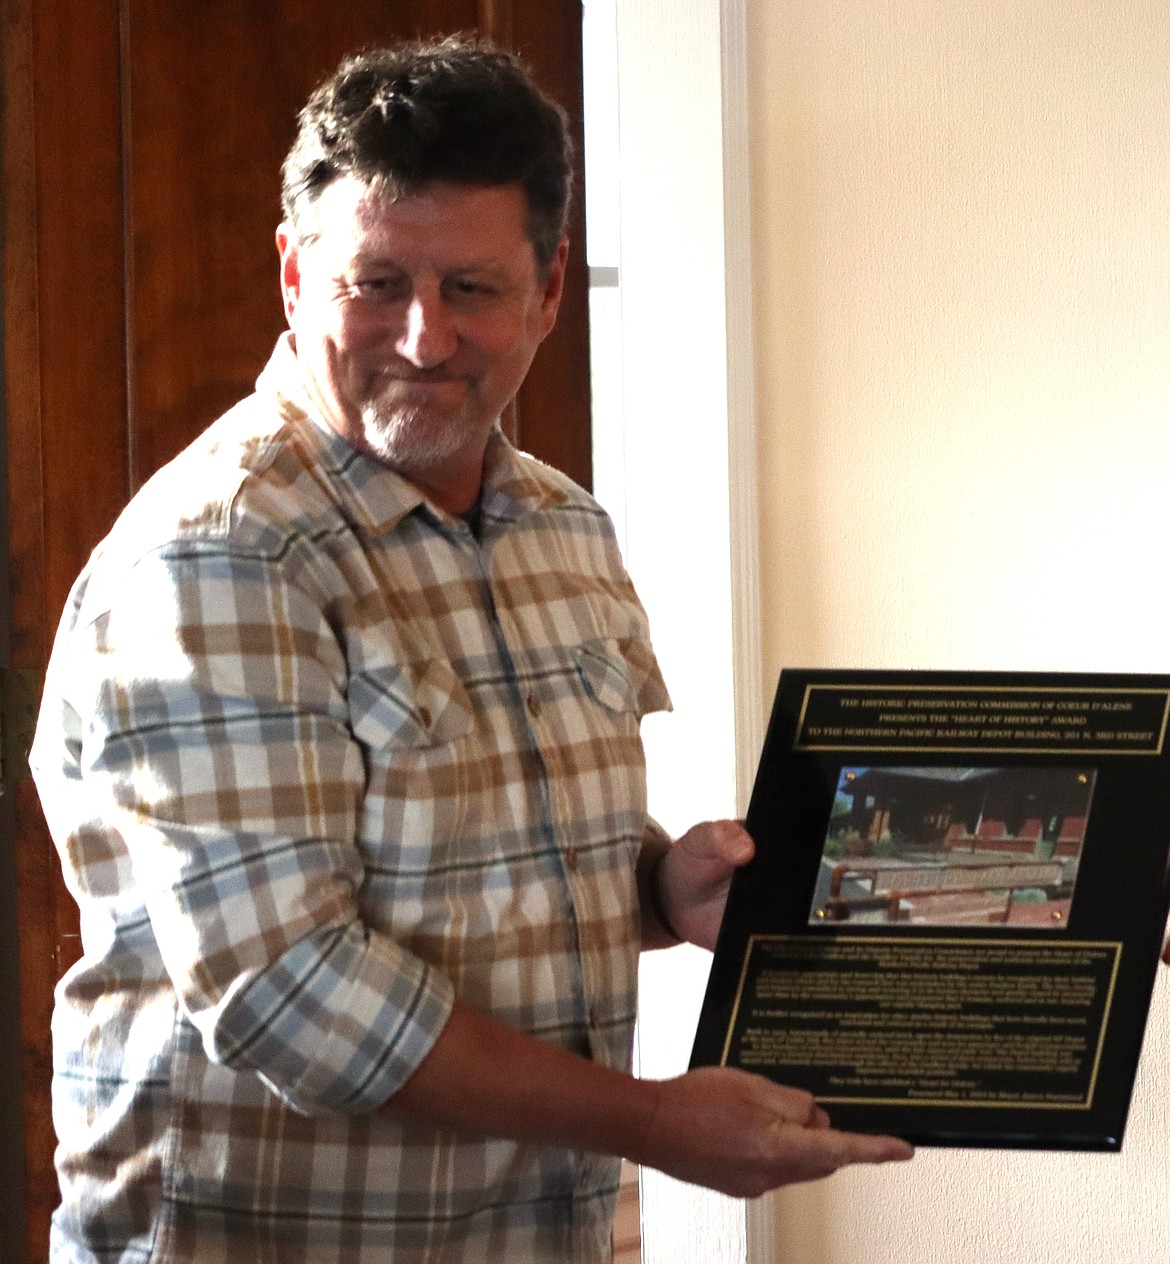 John Swallow holds the Heart of History plaque he received Wednesday night at the Jewett House.